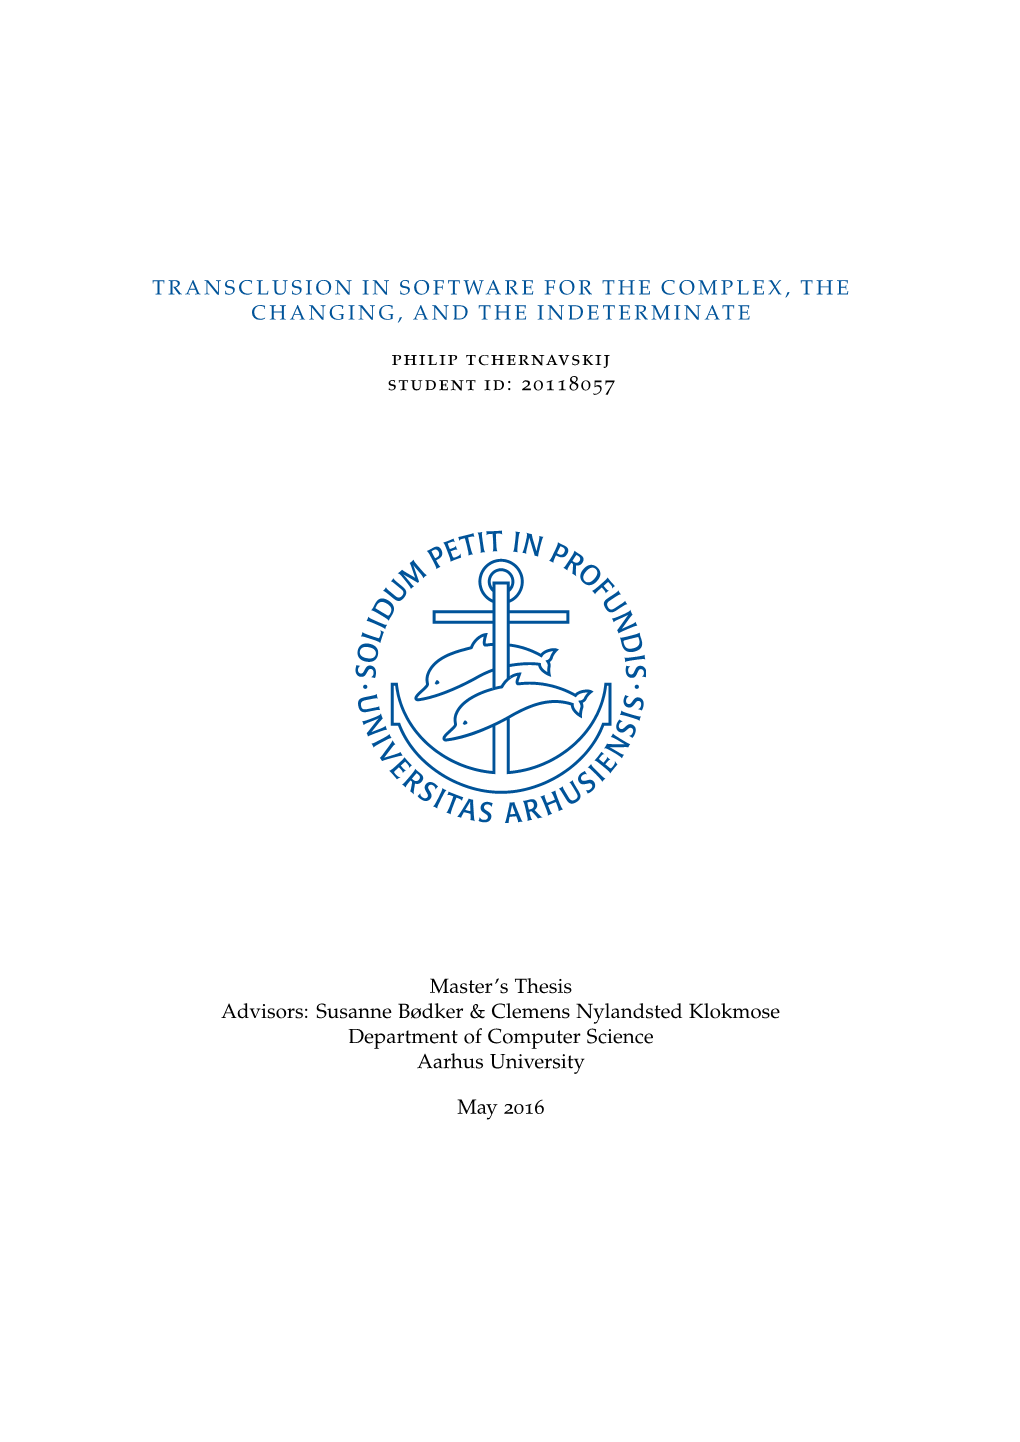 Transclusion in Software for the Complex, the Changing, and The